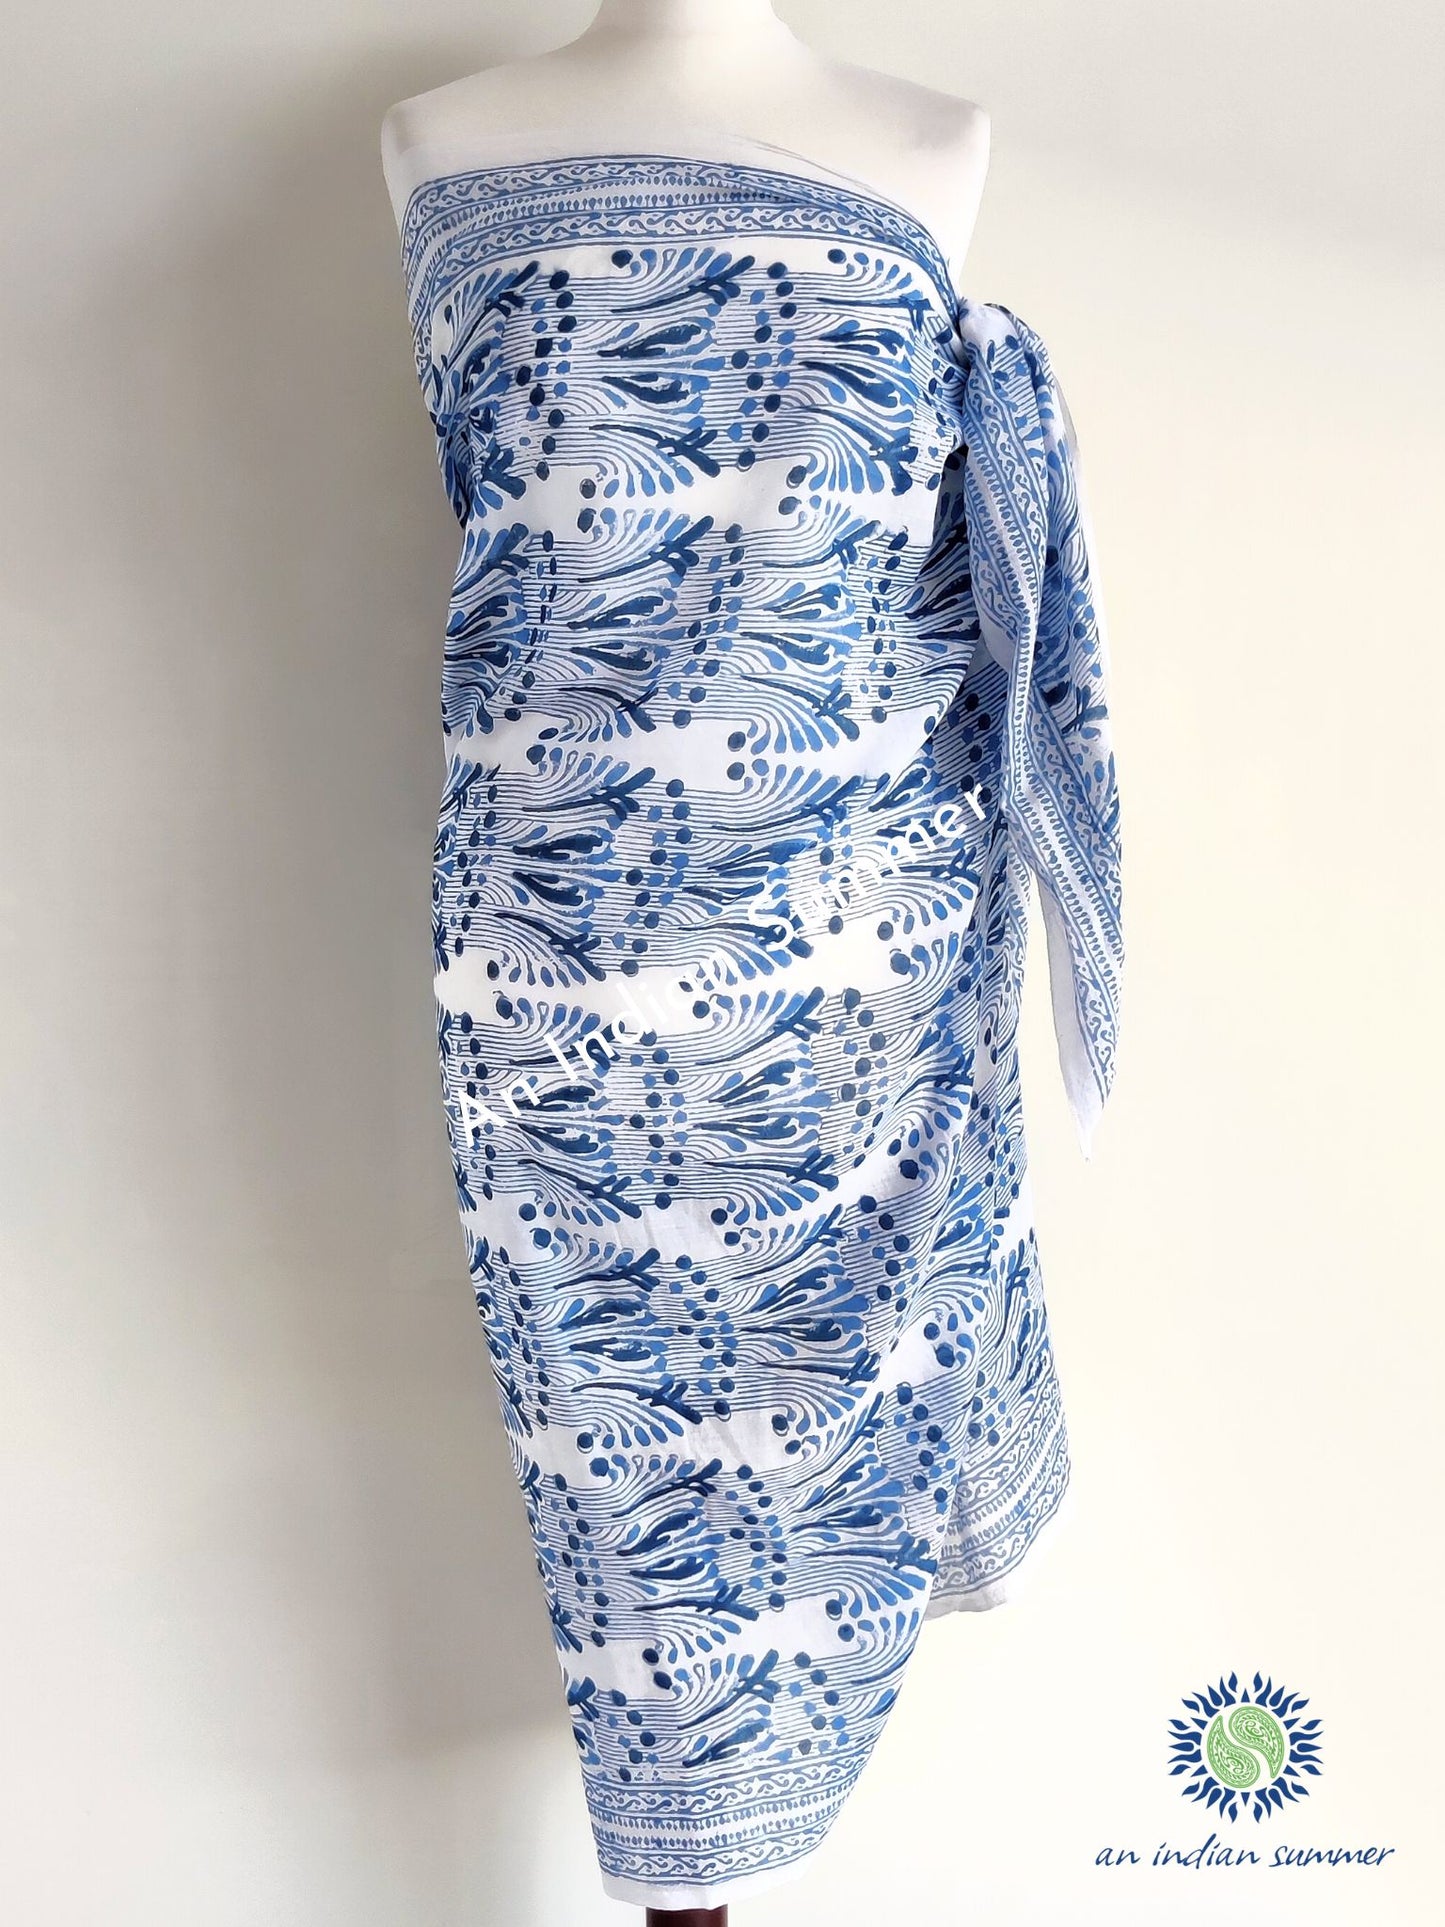 Elements Sarong Pareo | Blue Grey Abstract Print | Hand Block Printed | Soft Cotton Voile | An Indian Summer | Seasonless Timeless Sustainable Ethical Authentic Artisan Conscious Clothing Lifestyle Brand